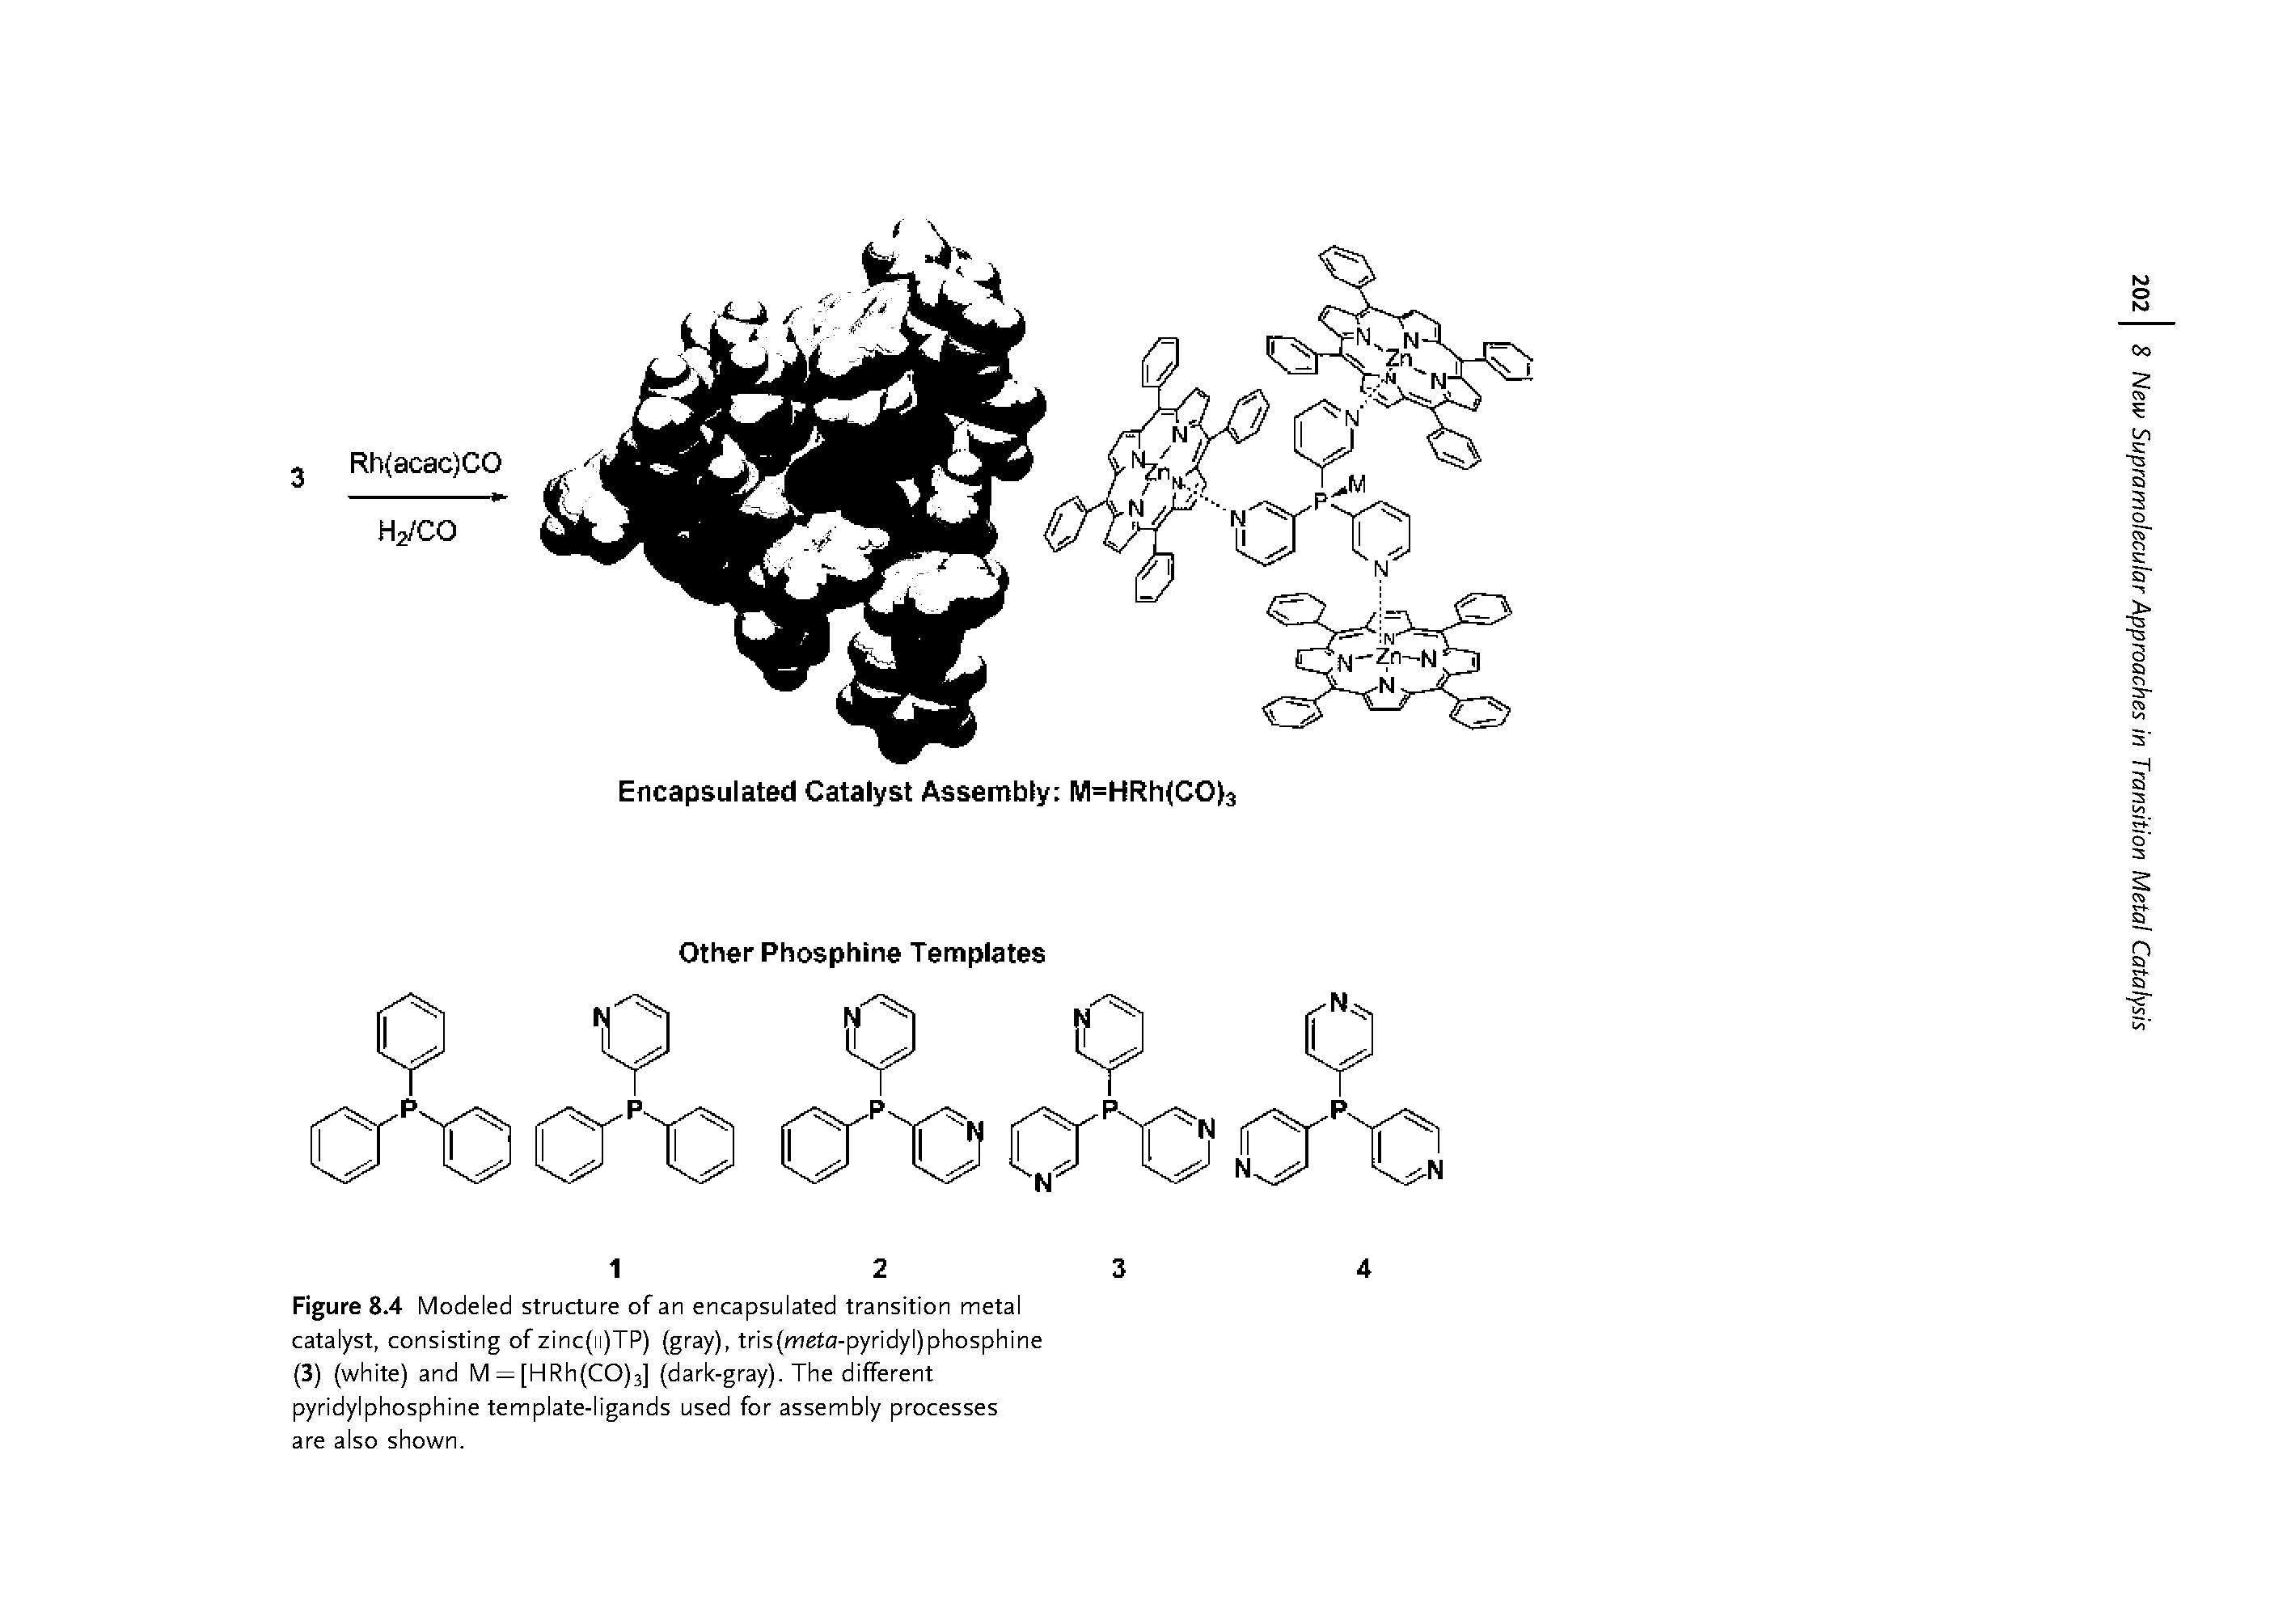 Figure 8.4 Modeled structure of an encapsulated transition metal catalyst, consisting of zinc(ii)TP) (gray), tris(meta-pyridyl)phosphine (3) (white) and M = [HRh(CO)3] (dark-gray). The different pyridylphosphine template-ligands used for assembly processes are also shown.